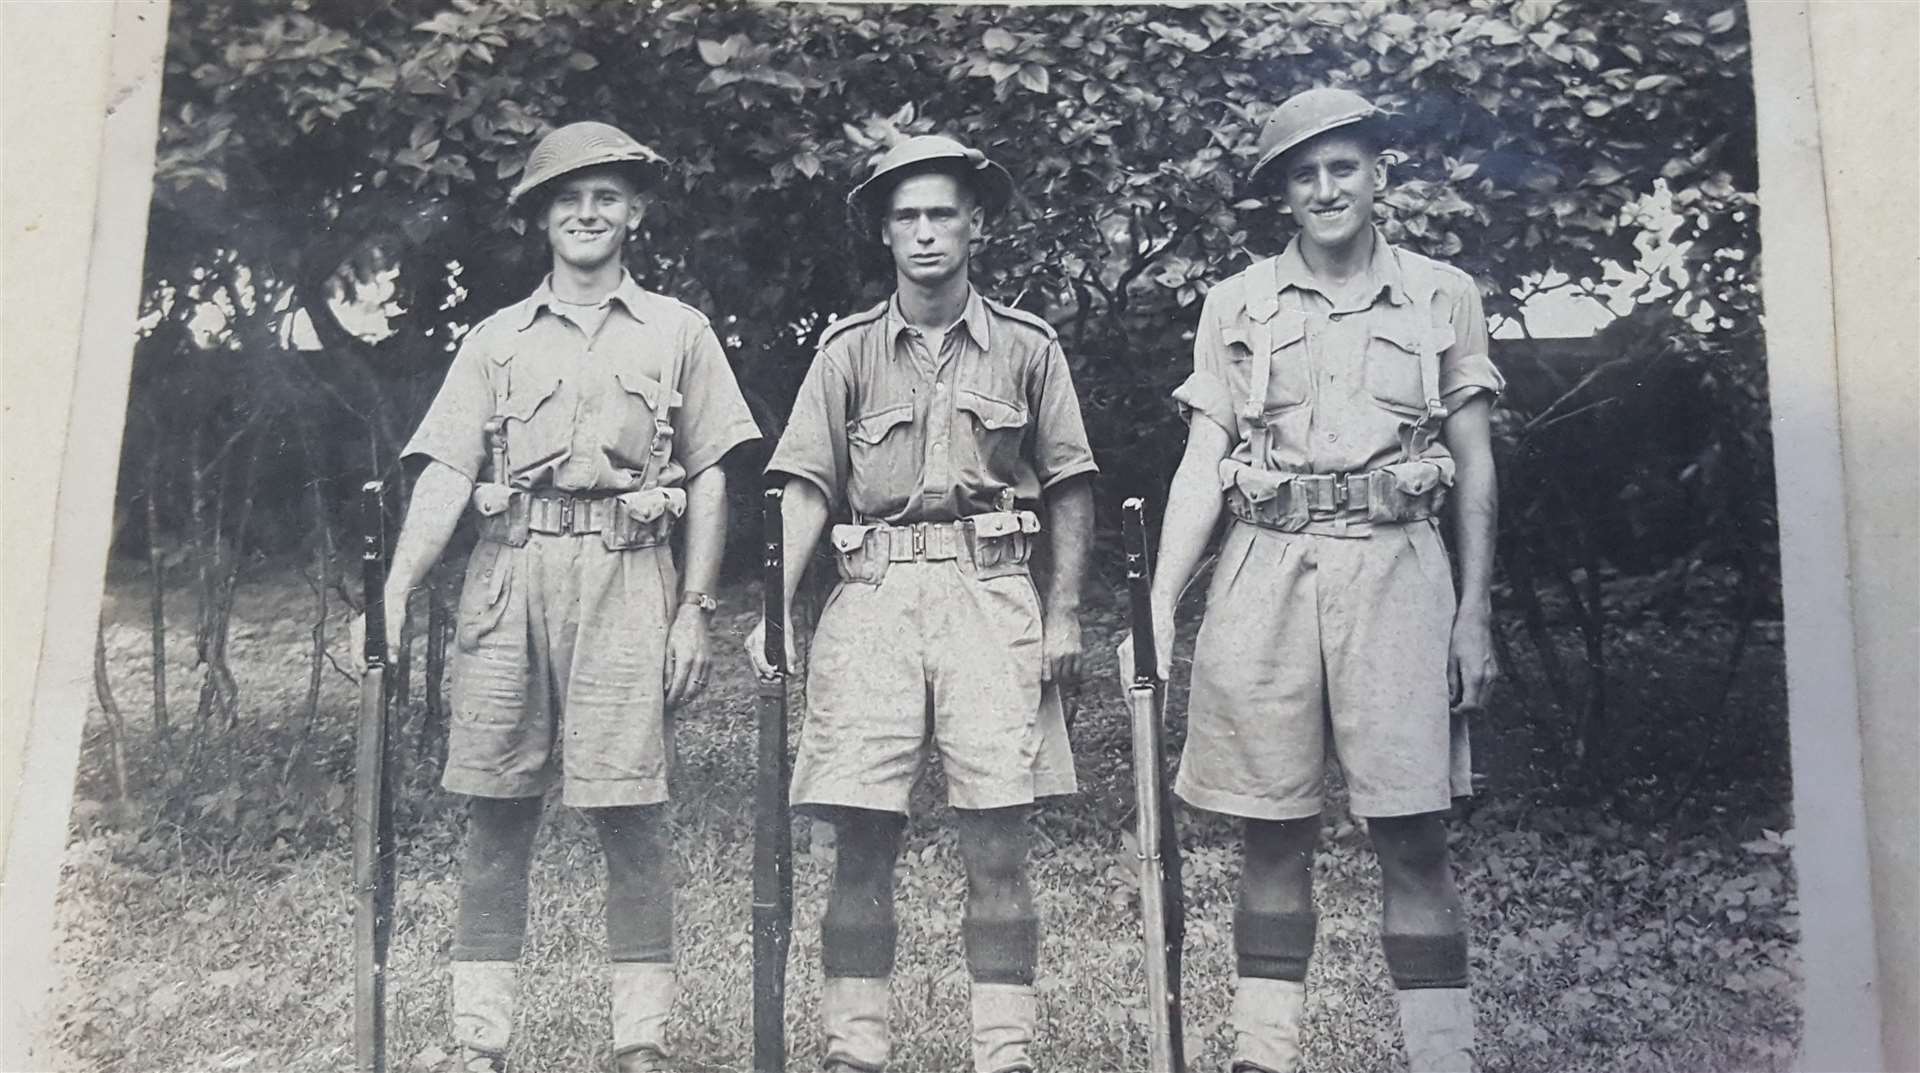 Leslie Burkett (right) in India with his fellow troops